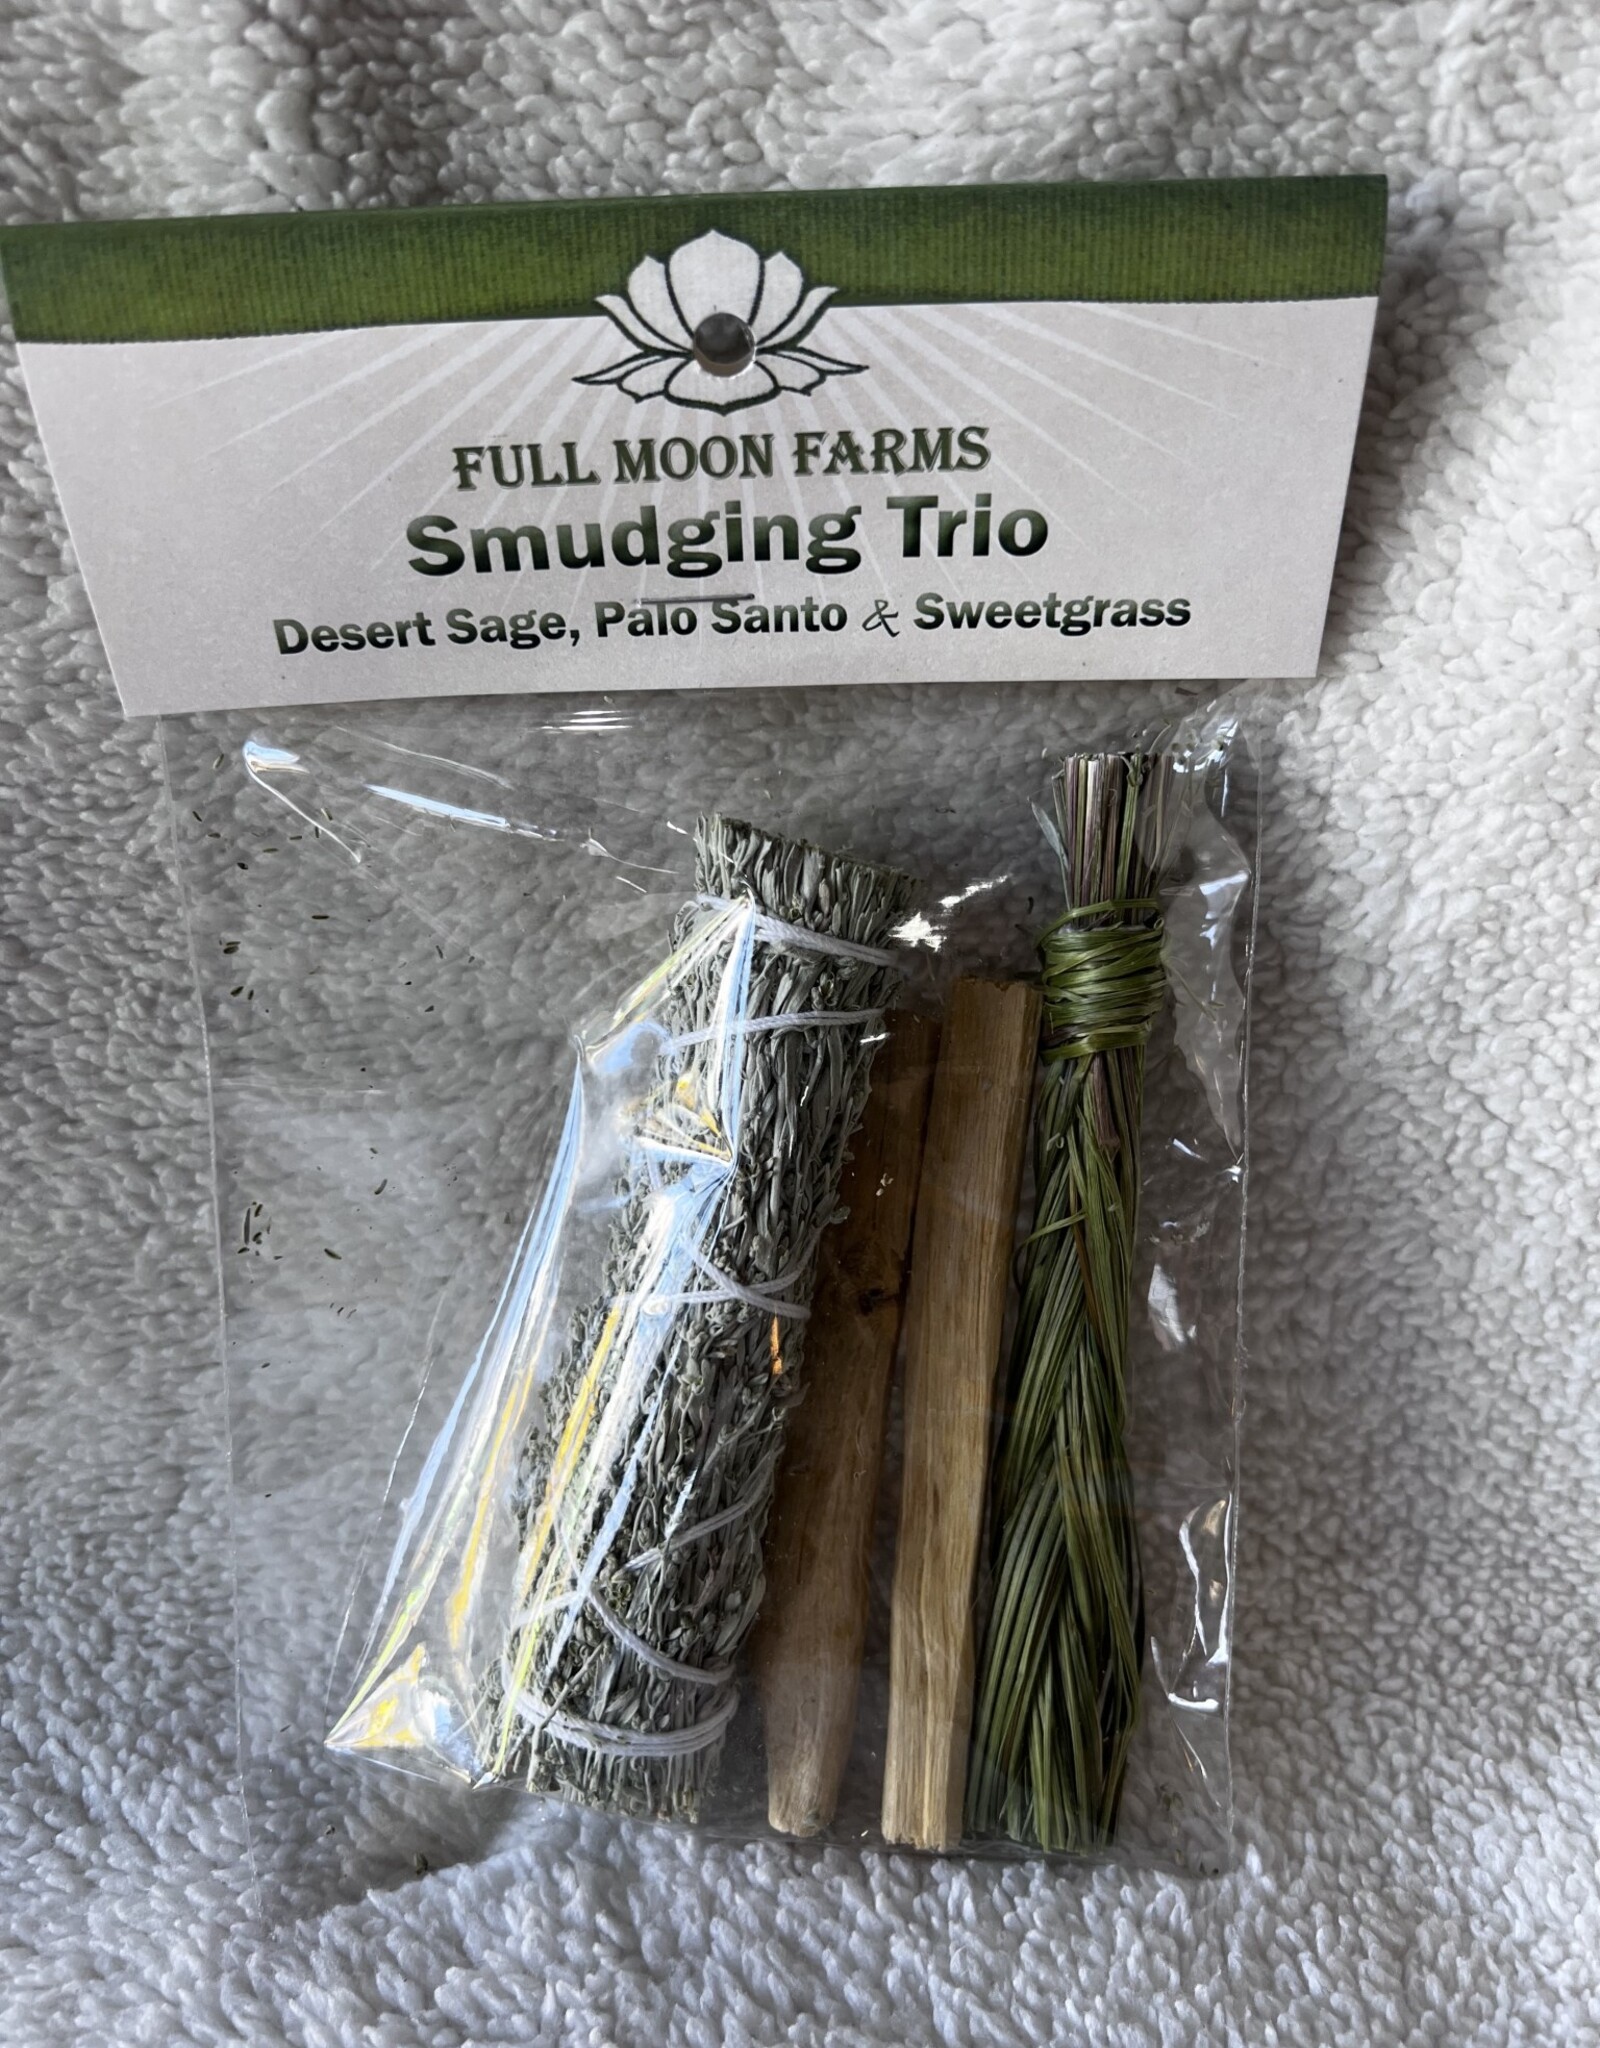 Full Moons Farms Smudging Trio | Desert Sage, Palo Santo, and Sweetgrass